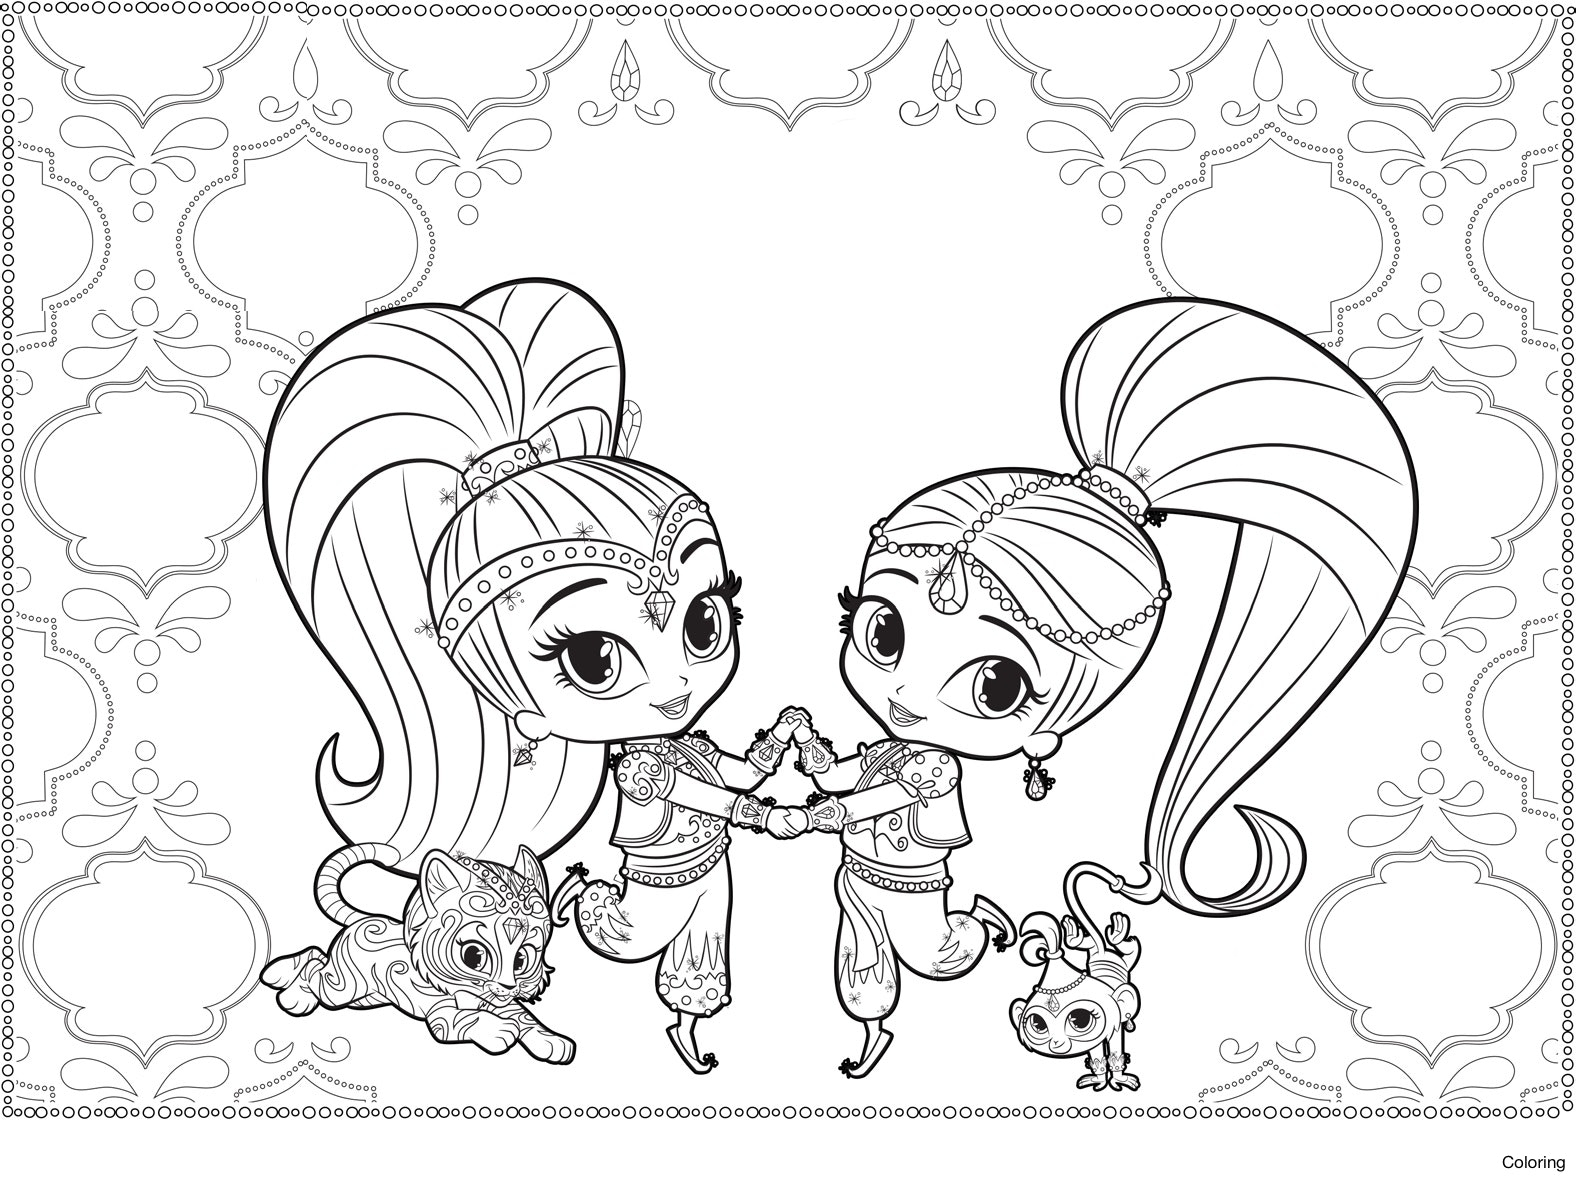 Shimmer And Shine Holding Hands para colorir